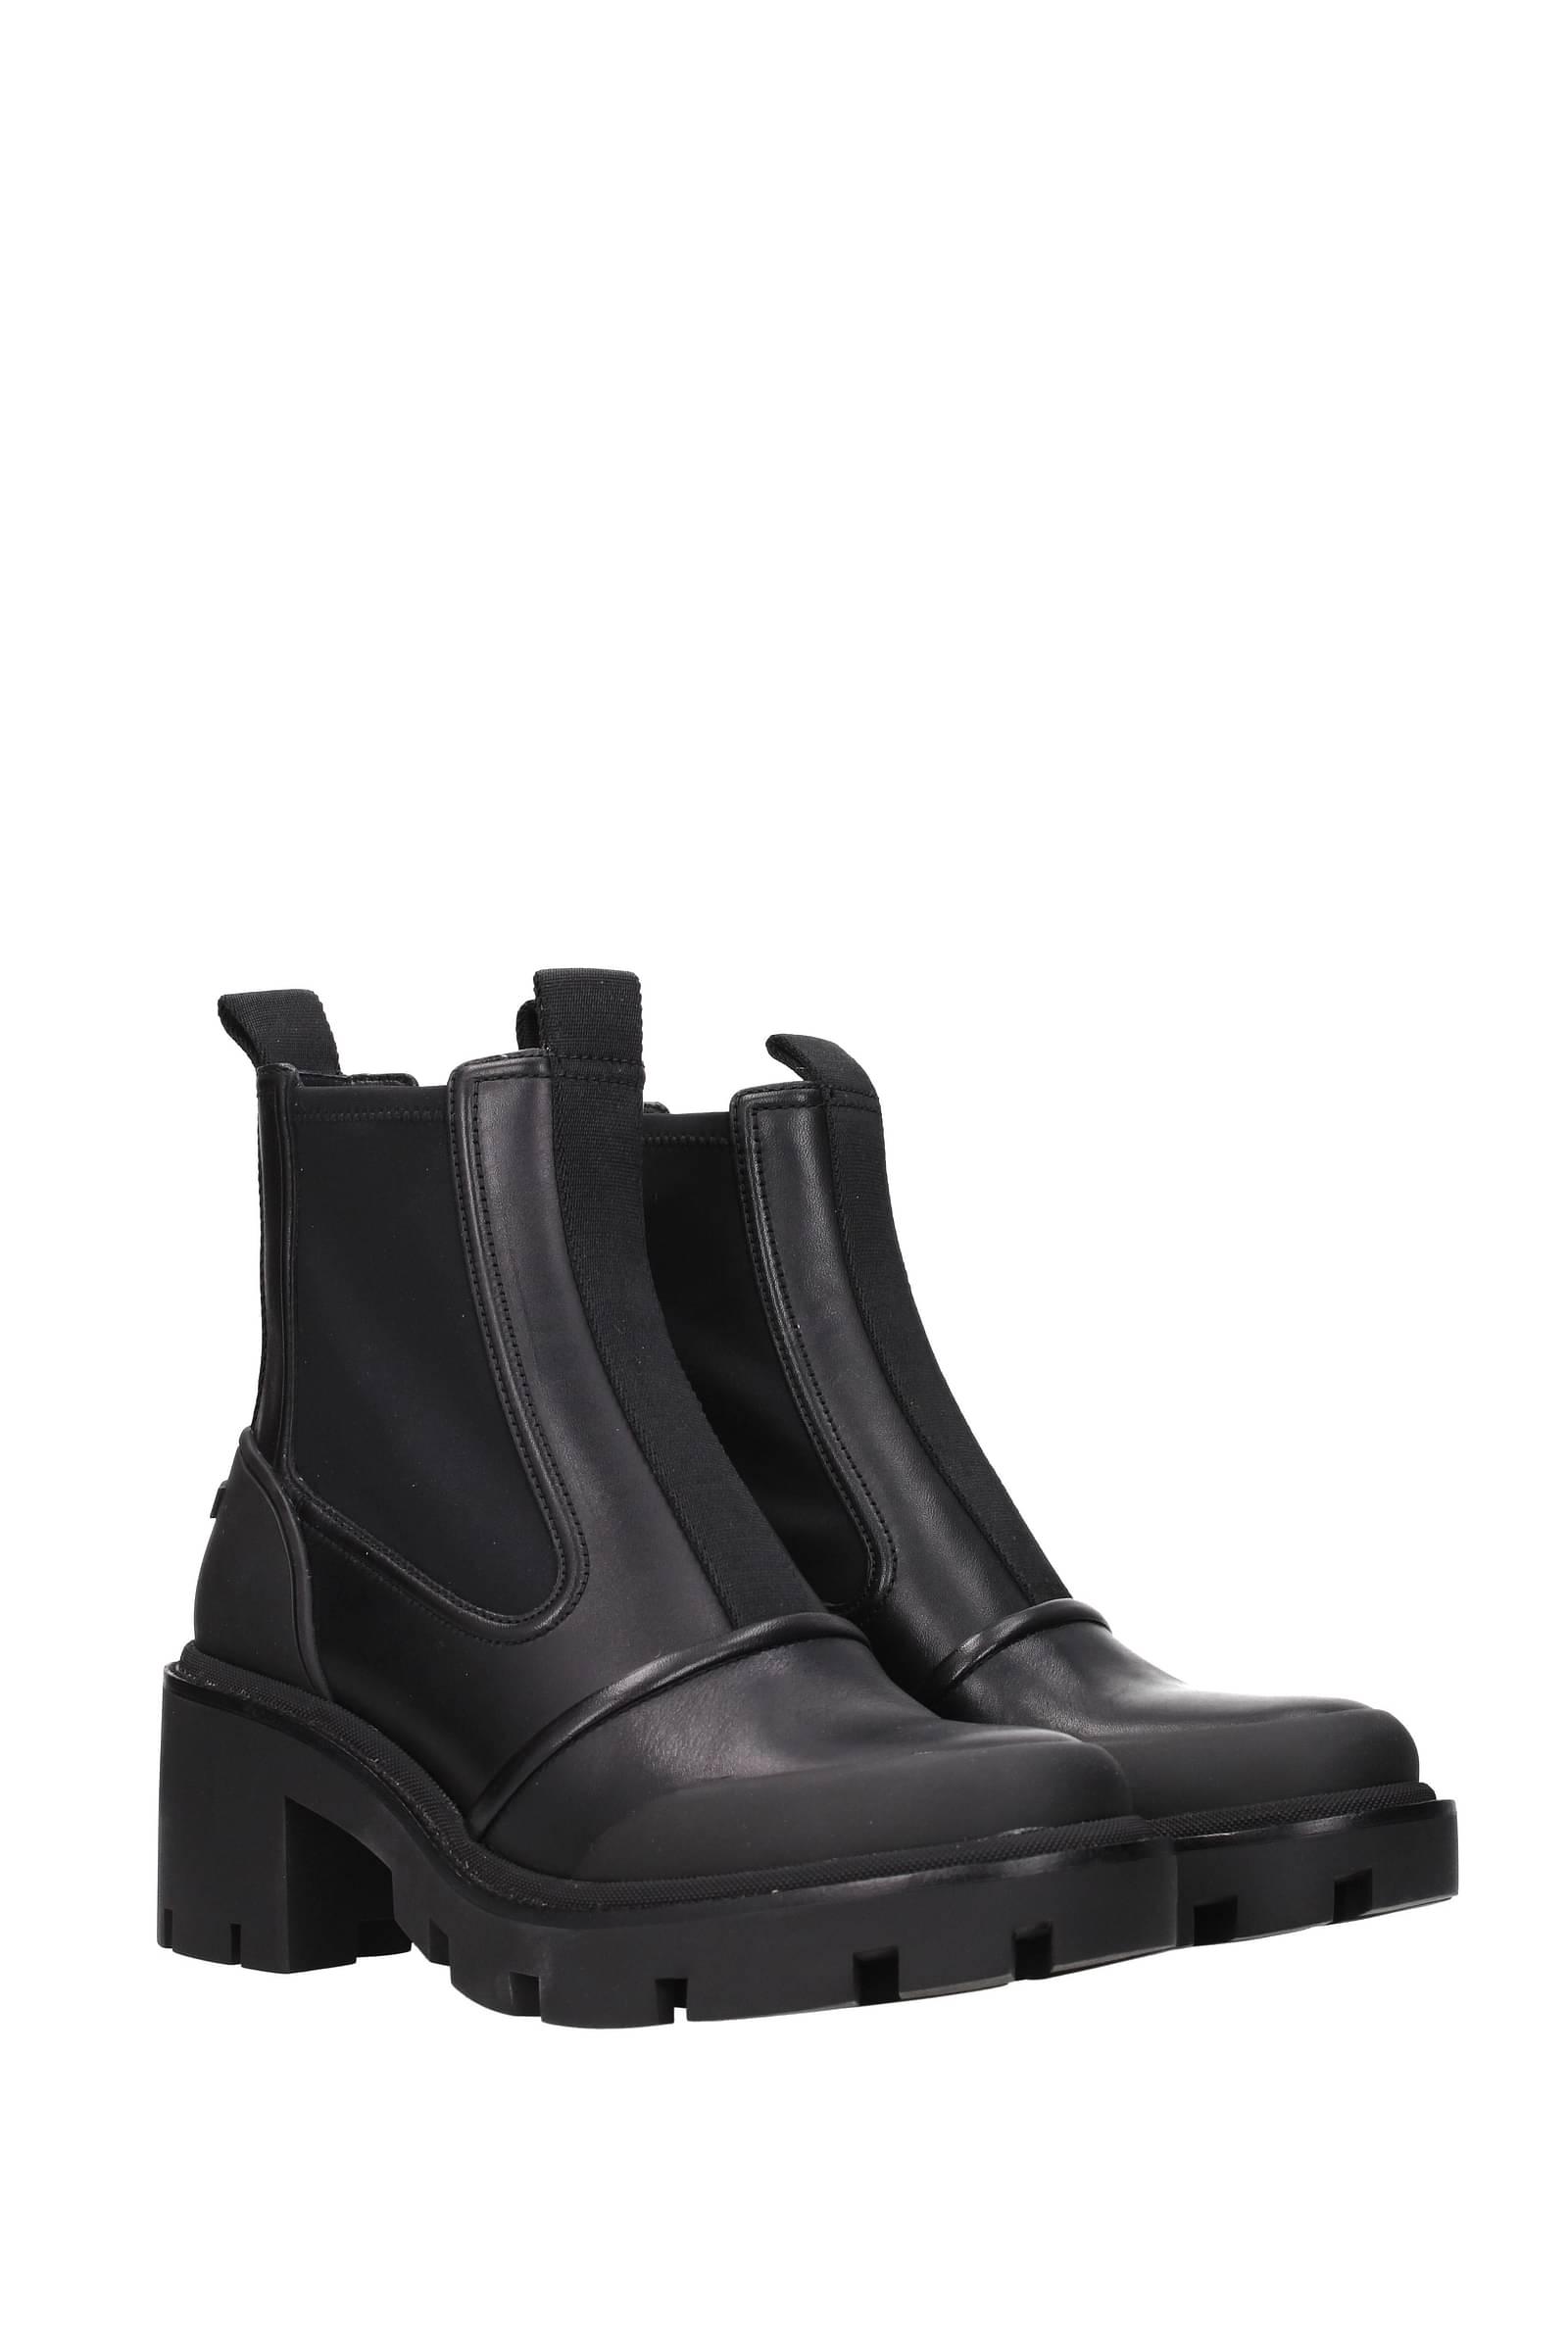 Tory Burch Chelsea Lug Sole Ankle Boots in Black | Lyst